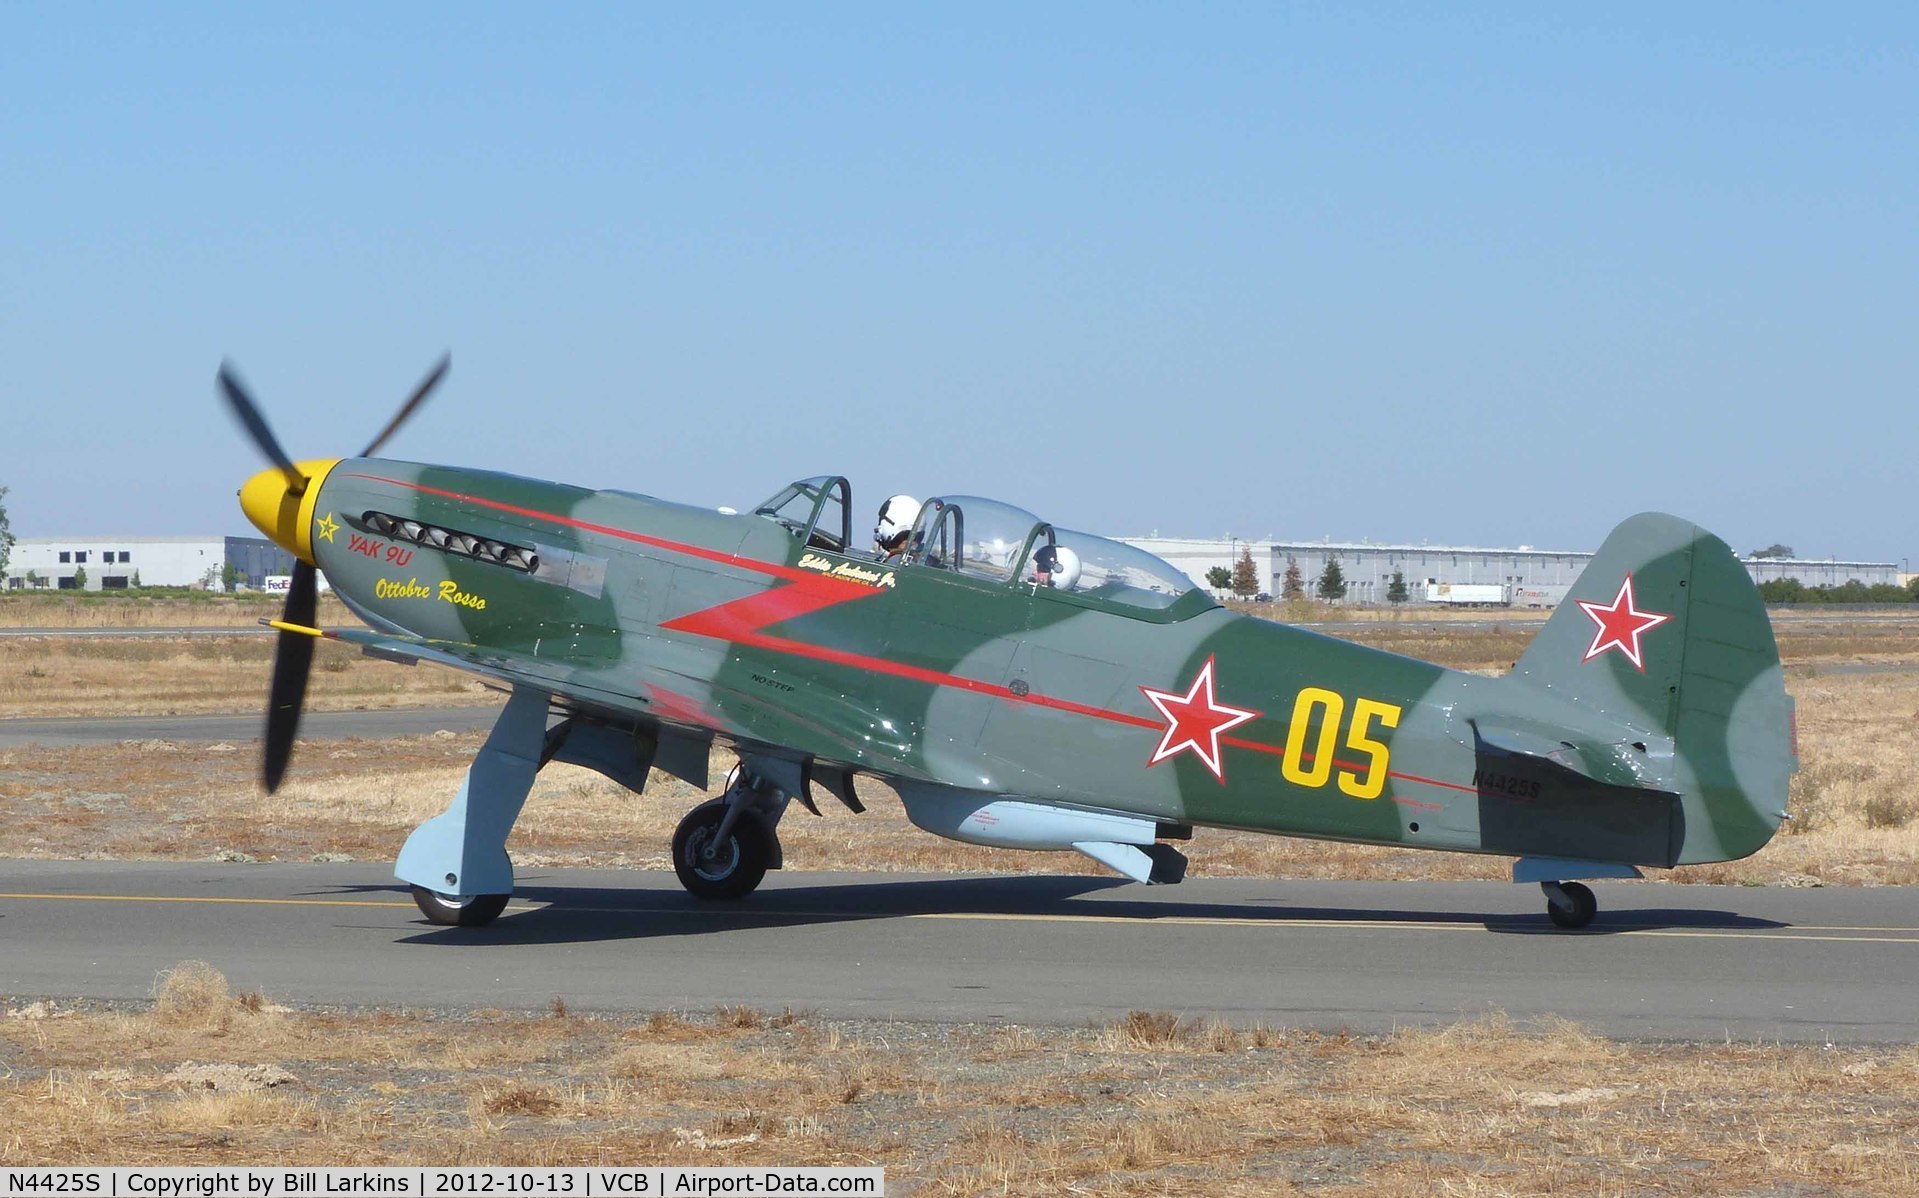 N4425S, 1997 Yakovlev Yak-9U-M C/N 0470405, IN for the Mustang Day celebration.